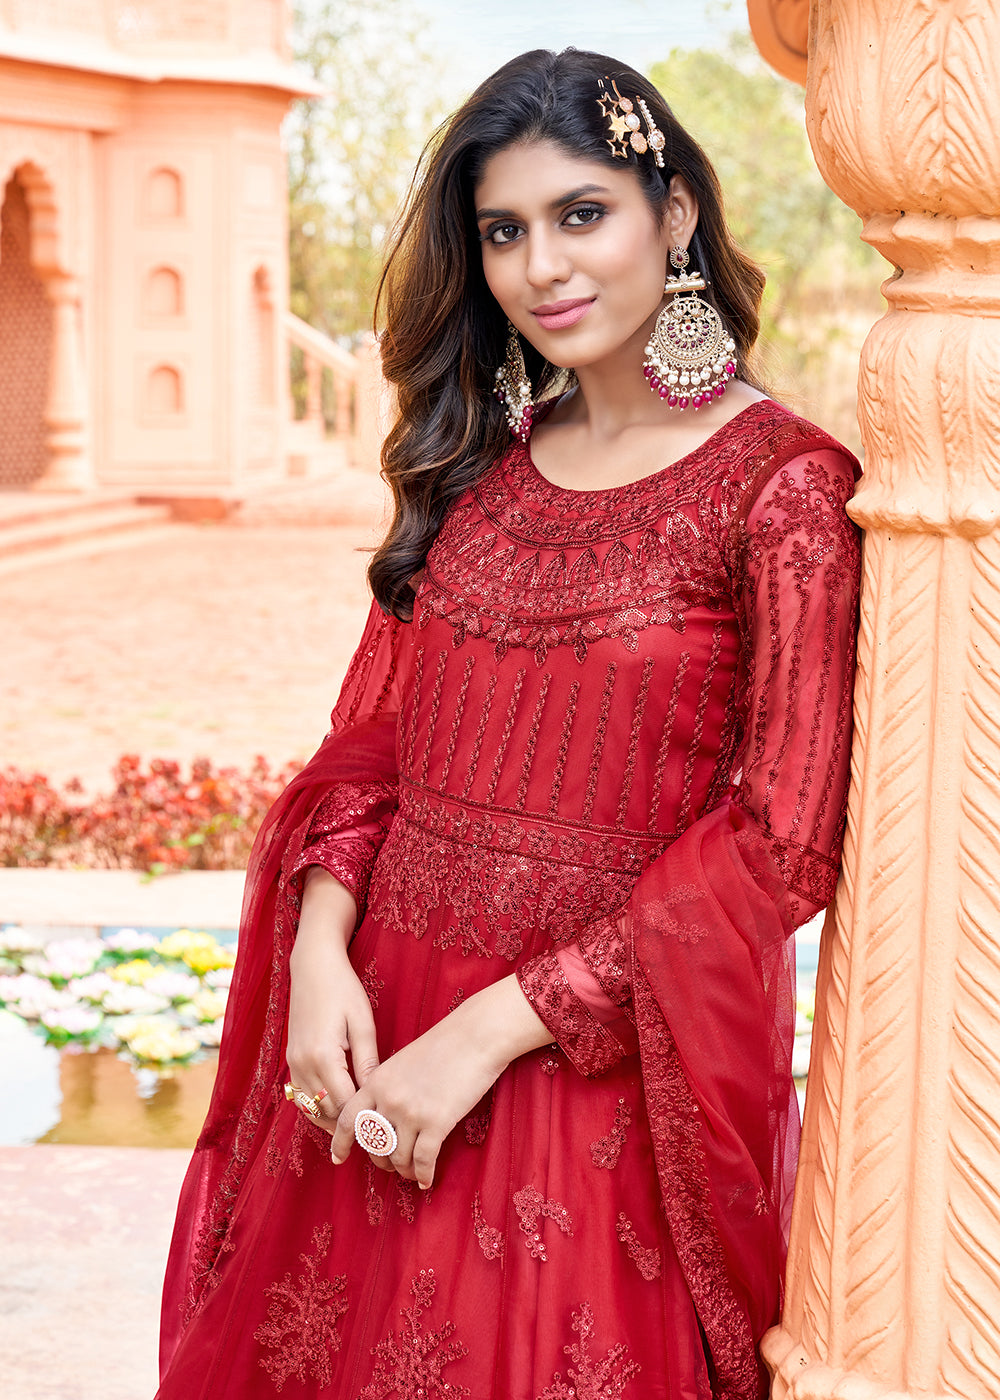 Buy Now Long Length Pretty Red Embroidered Net Anarkali Suit Online in USA, UK, Australia, New Zealand, Canada, Italy & Worldwide at Empress Clothing. 